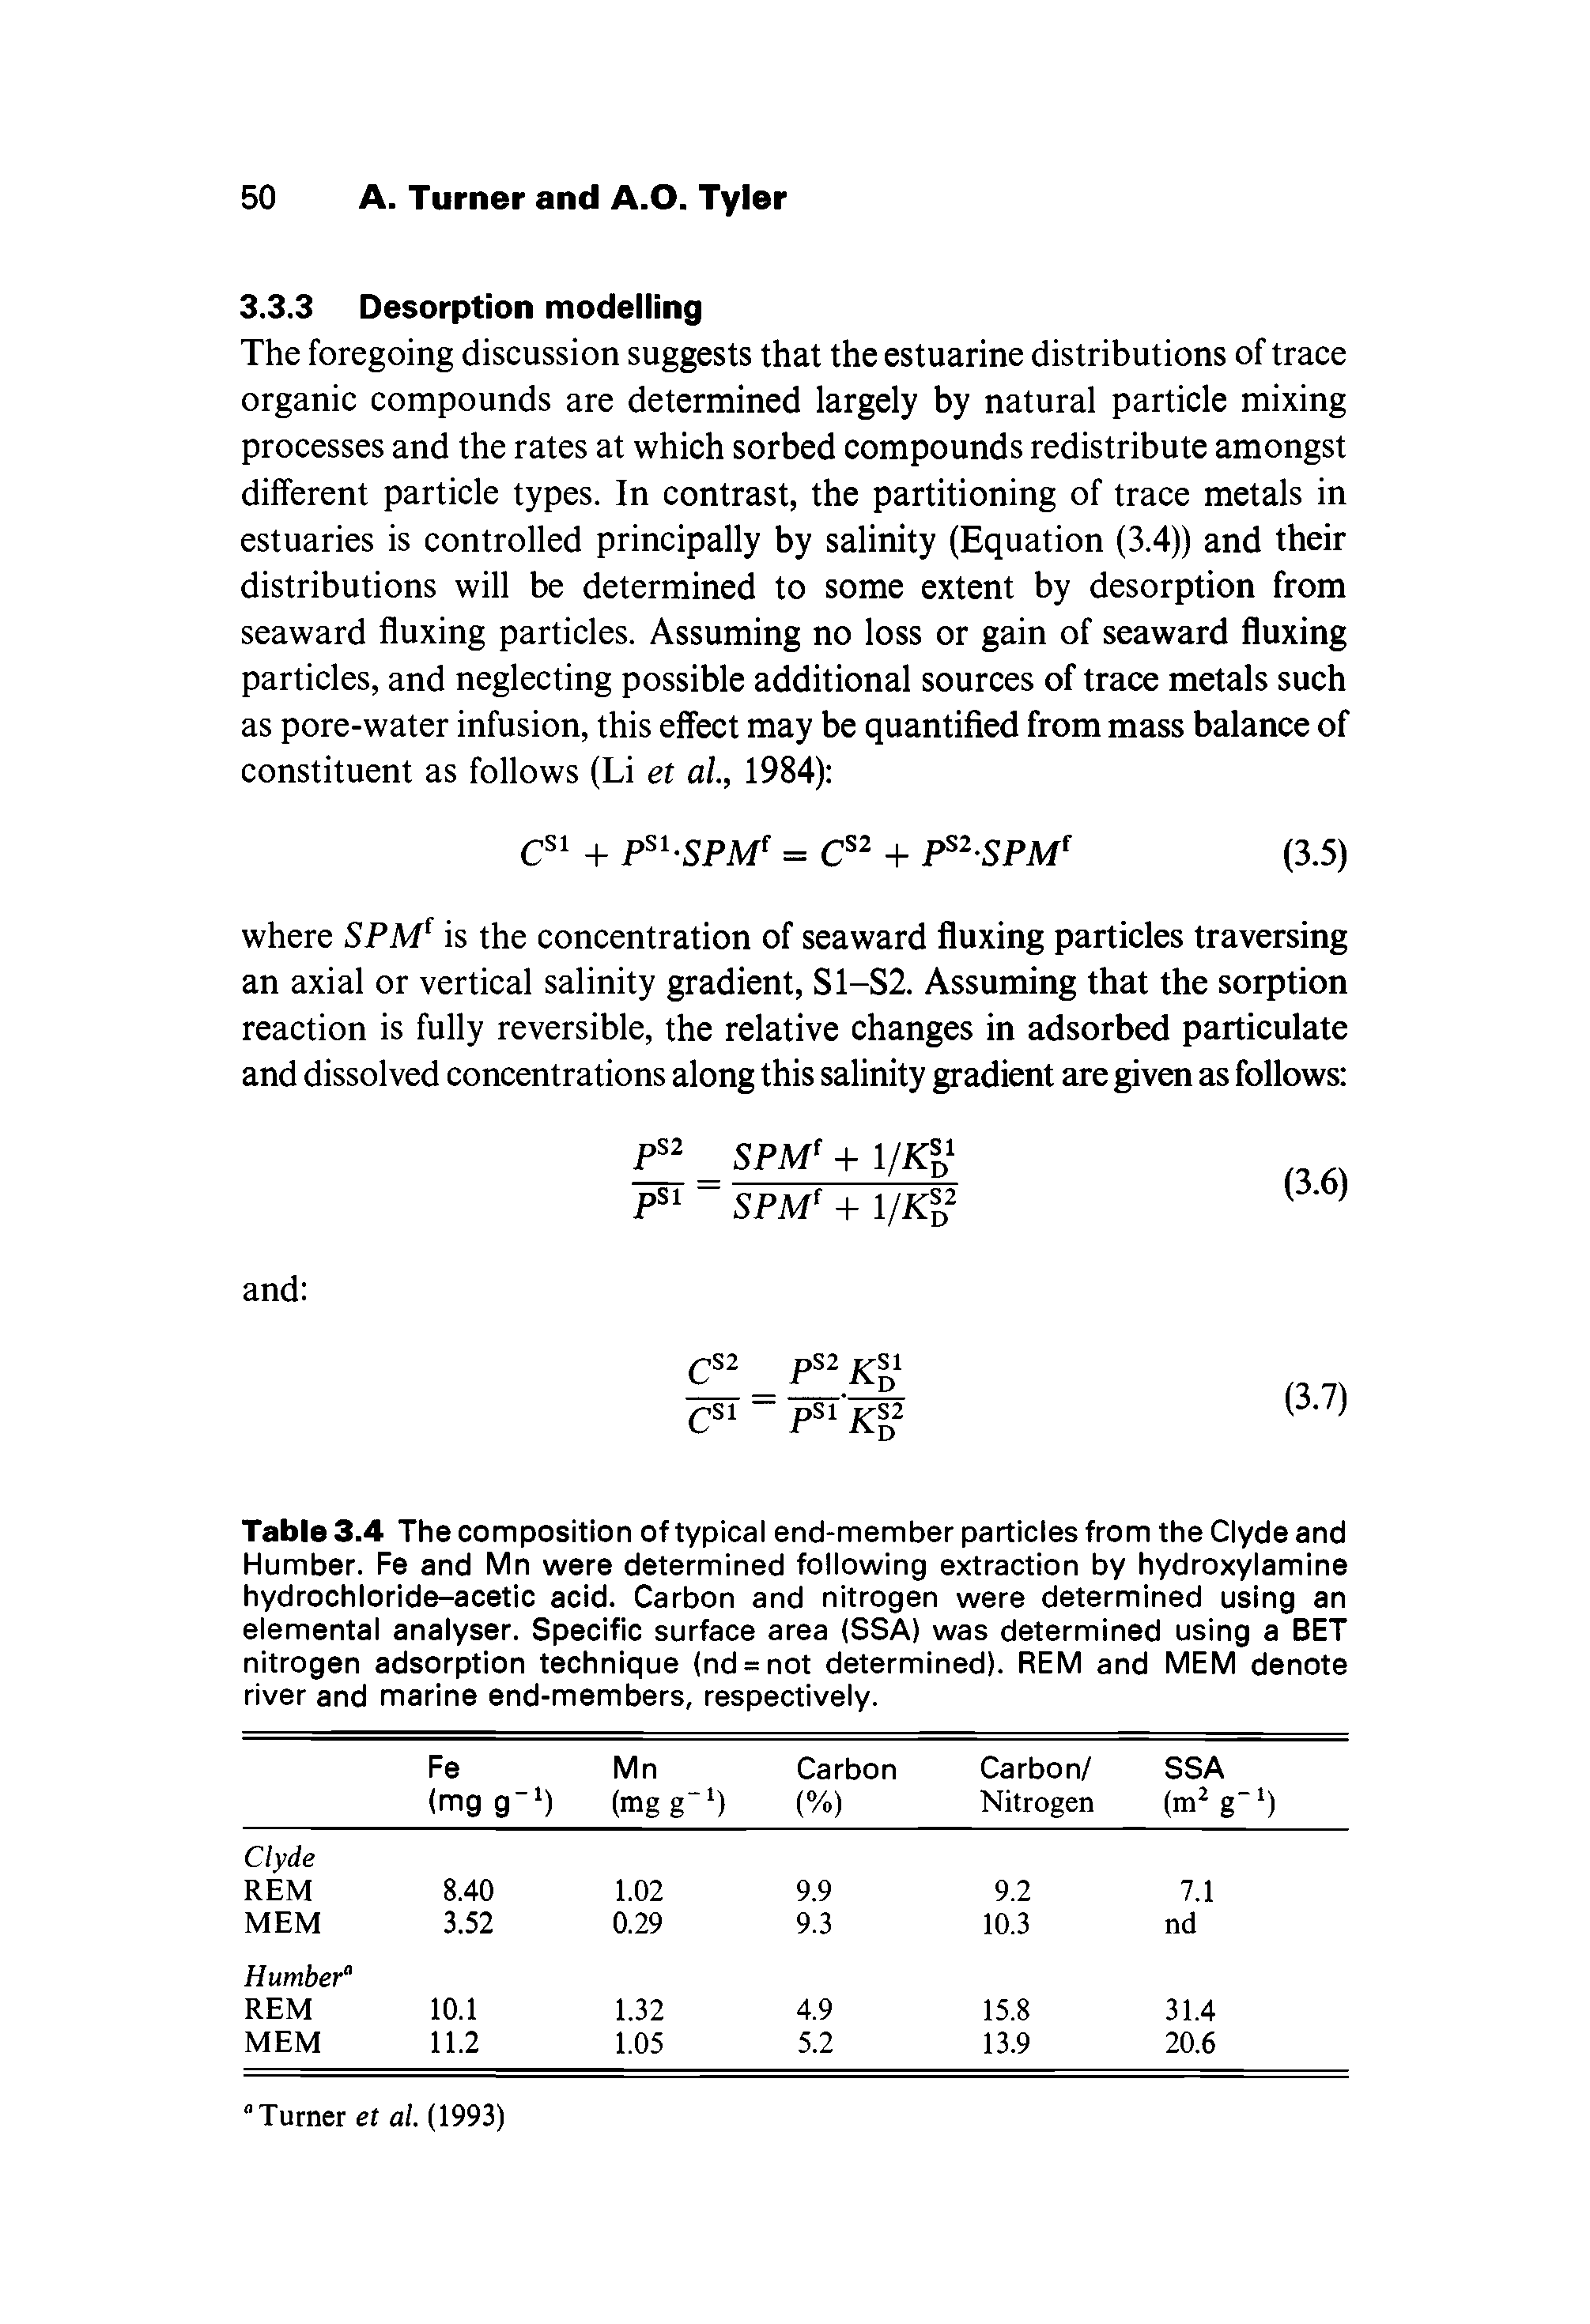 Table 3.4 The composition of typical end-member particles from the Clyde and Humber. Fe and Mn were determined following extraction by hydroxylamine hydrochloride-acetic acid. Carbon and nitrogen were determined using an elemental analyser. Specific surface area (SSA) was determined using a BET nitrogen adsorption technique (nd = not determined). REM and MEM denote river and marine end-members, respectively.